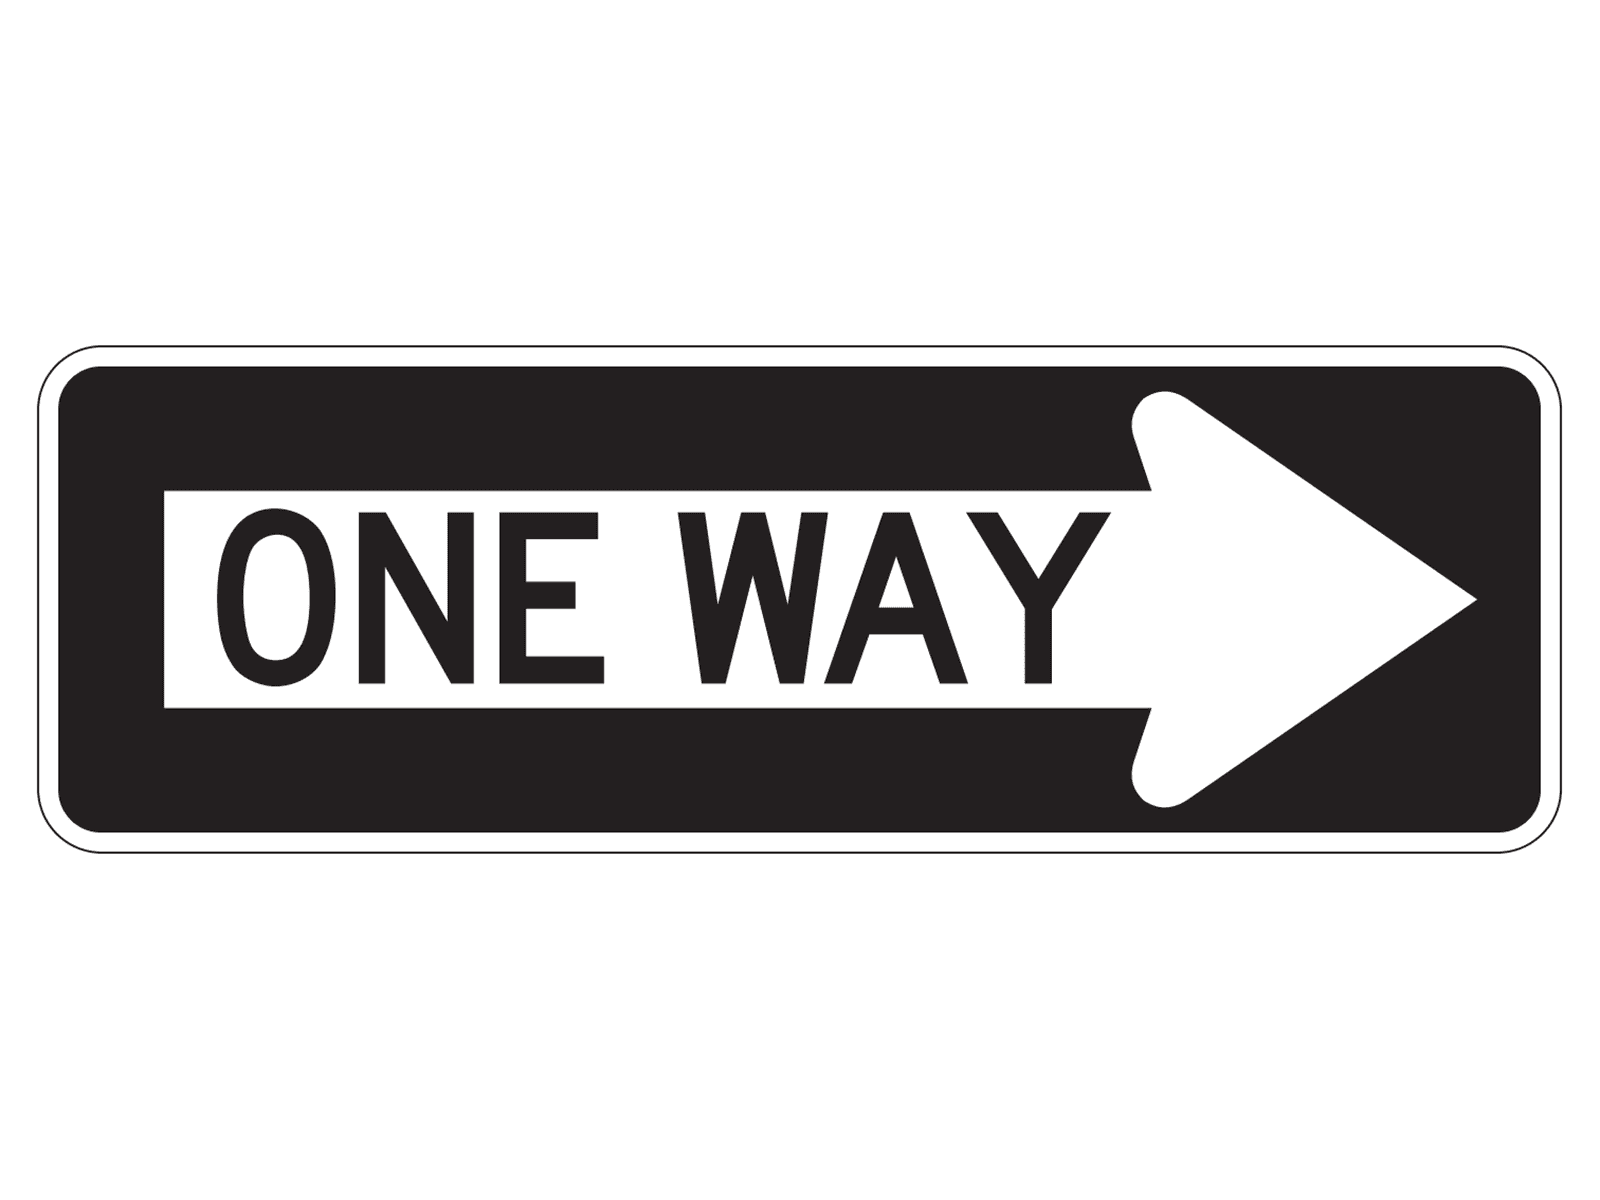 One Way R6-1R - R6: One Way and Divided Highway